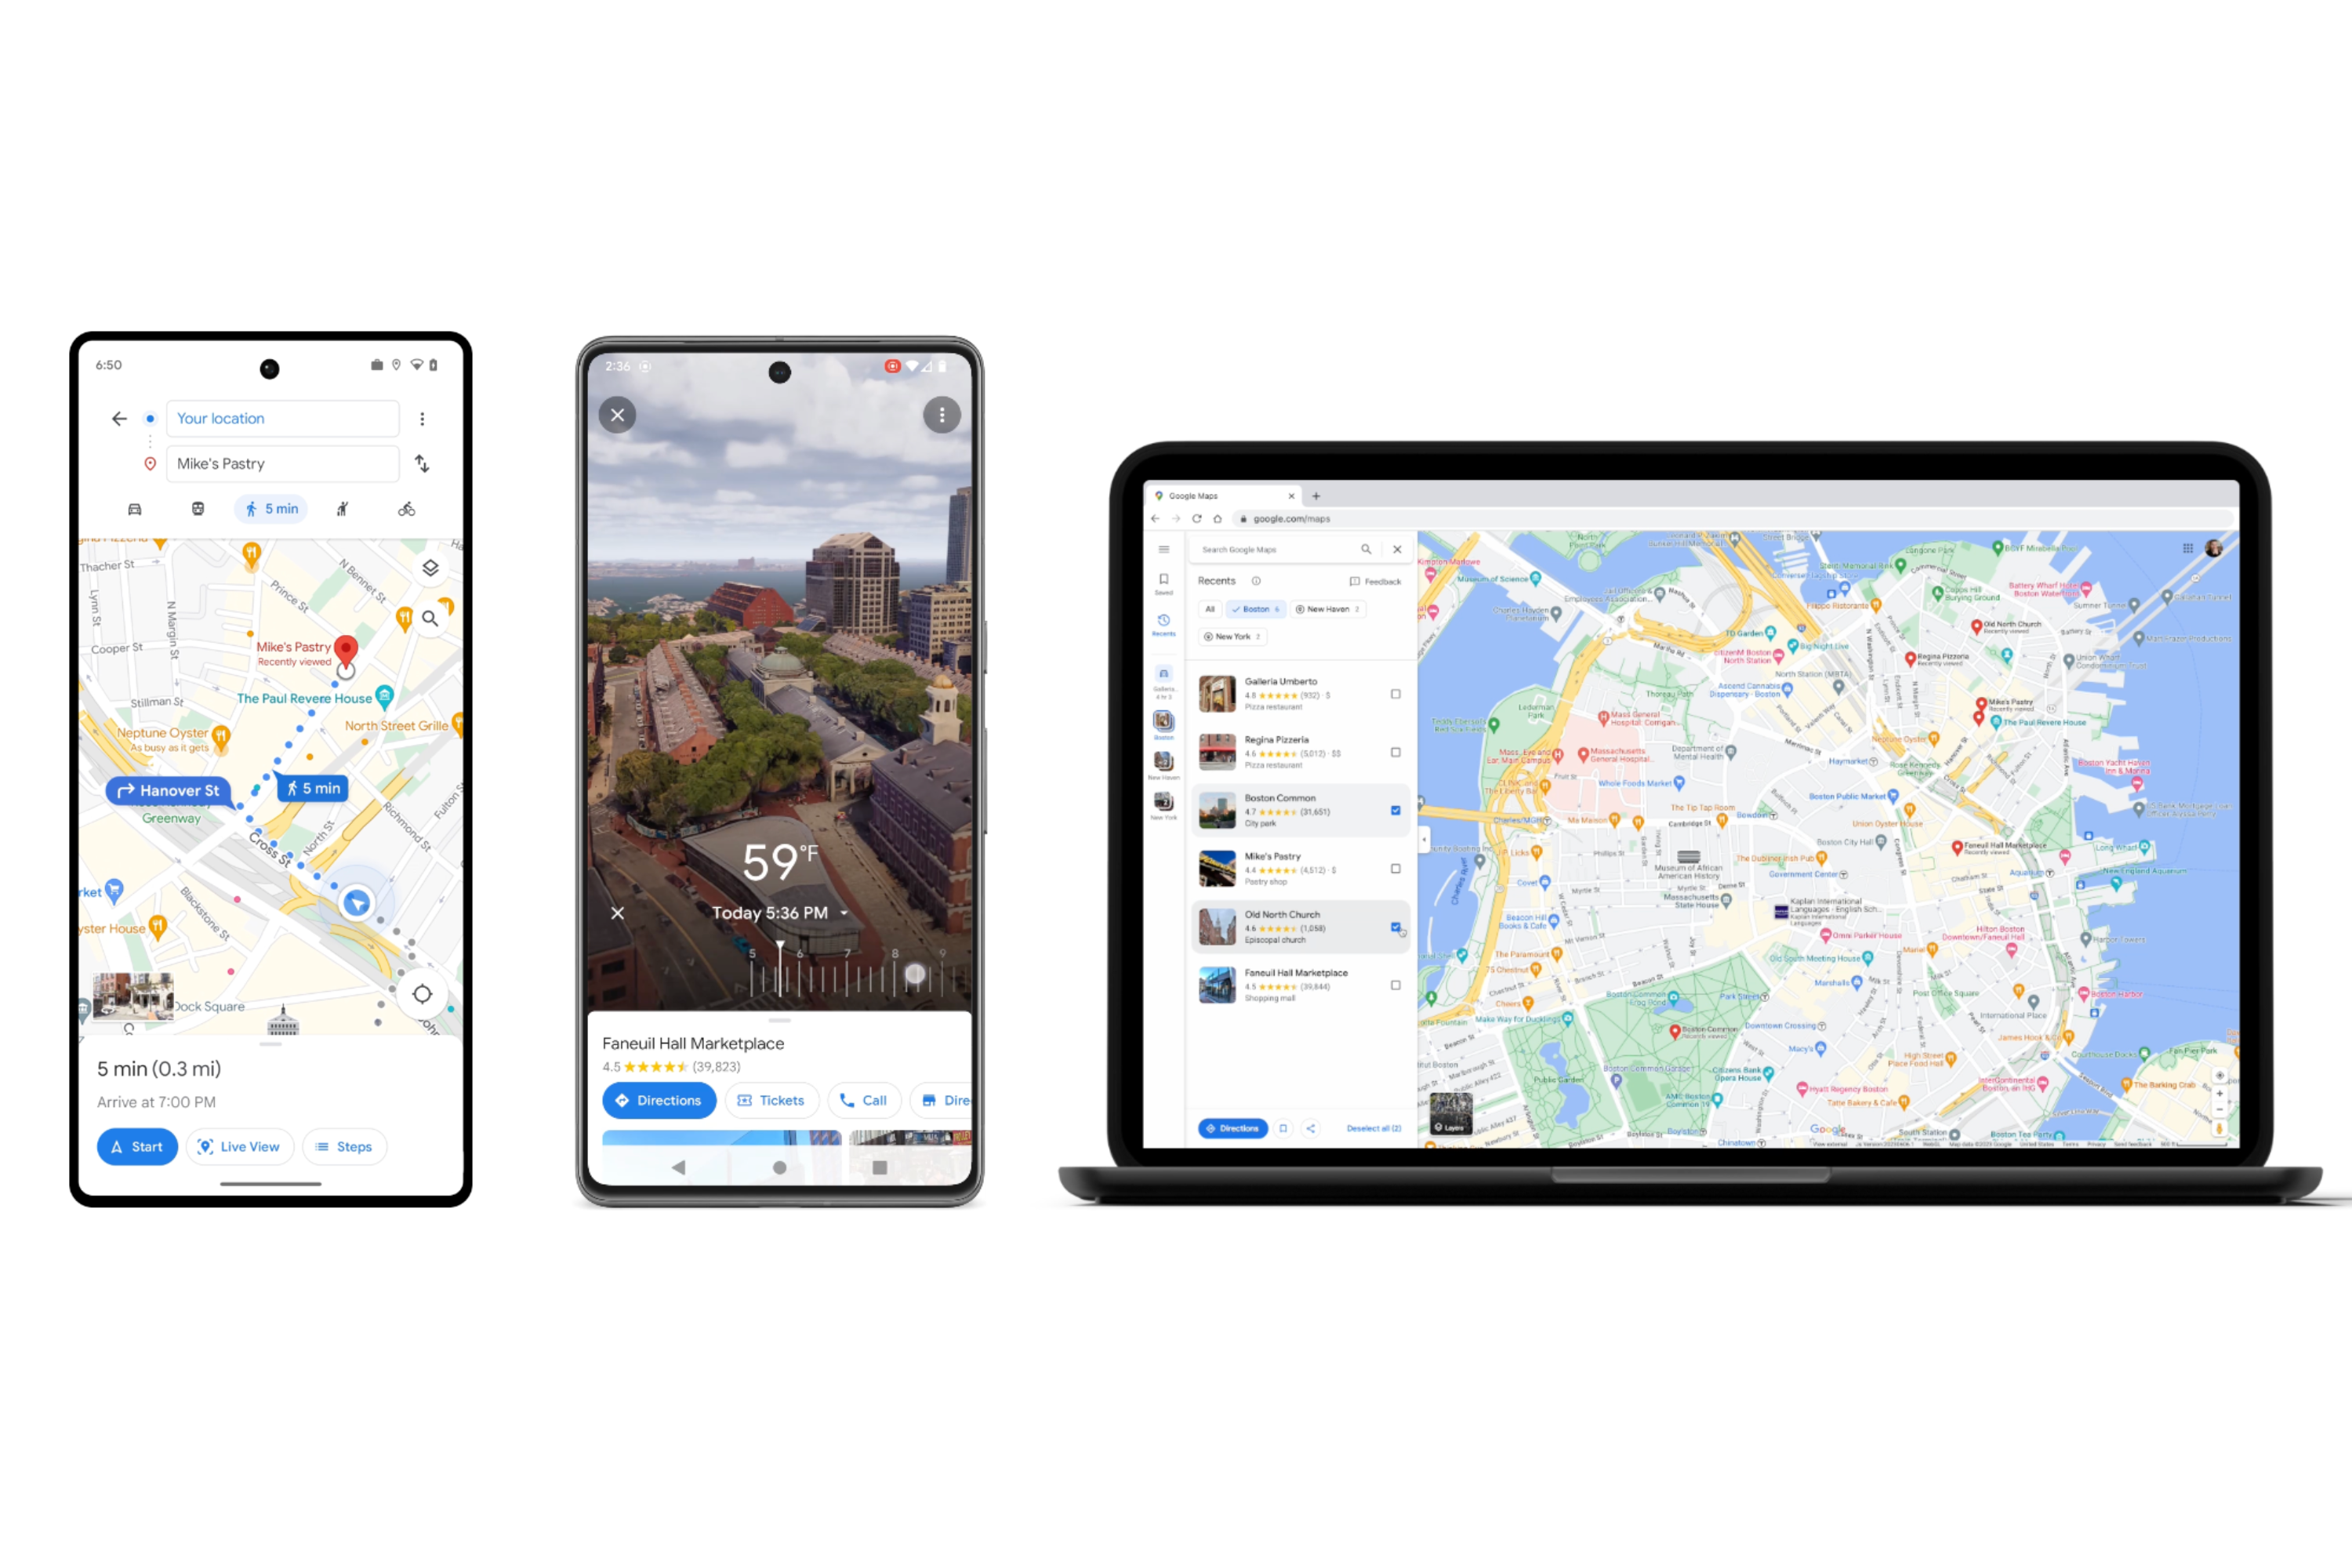 Google Maps Immersive View on one phone, glace directions on another, and Recents update on laptop